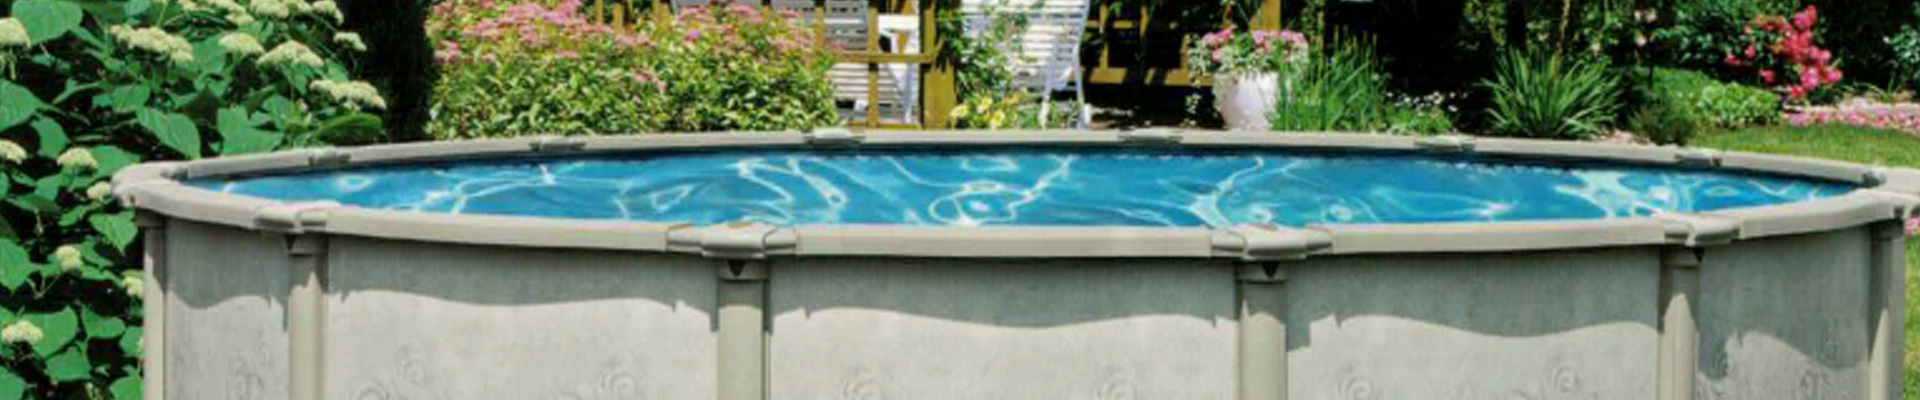 Inspiration Above Ground Pools